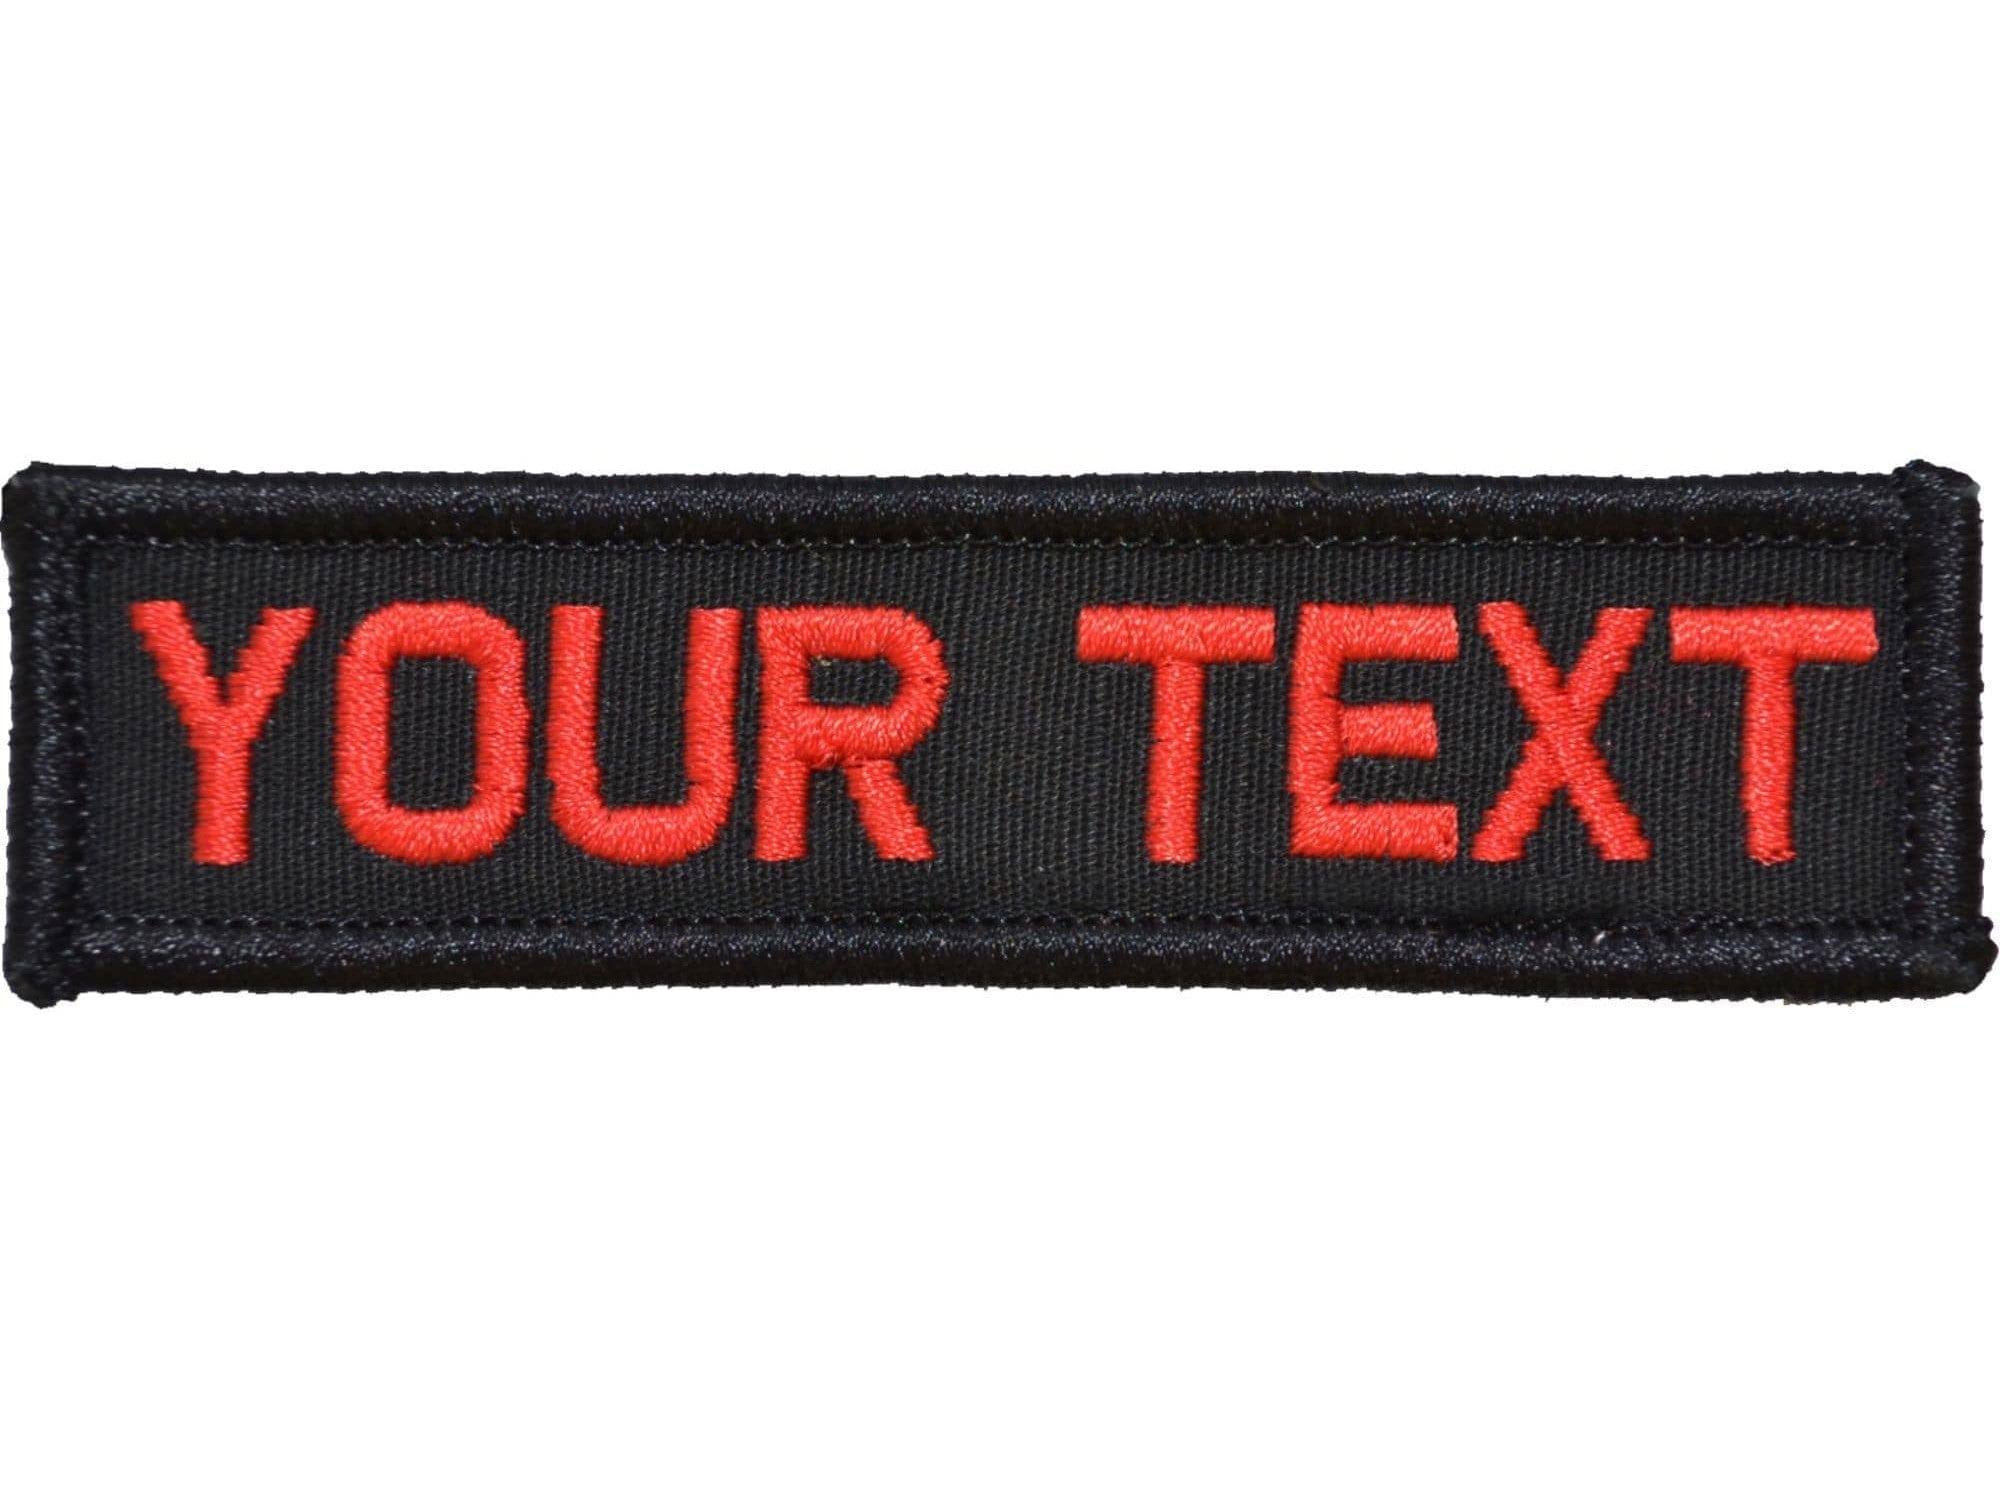 Rectangular 1 Line Personalized Embroidered Name Tag Patch (H)